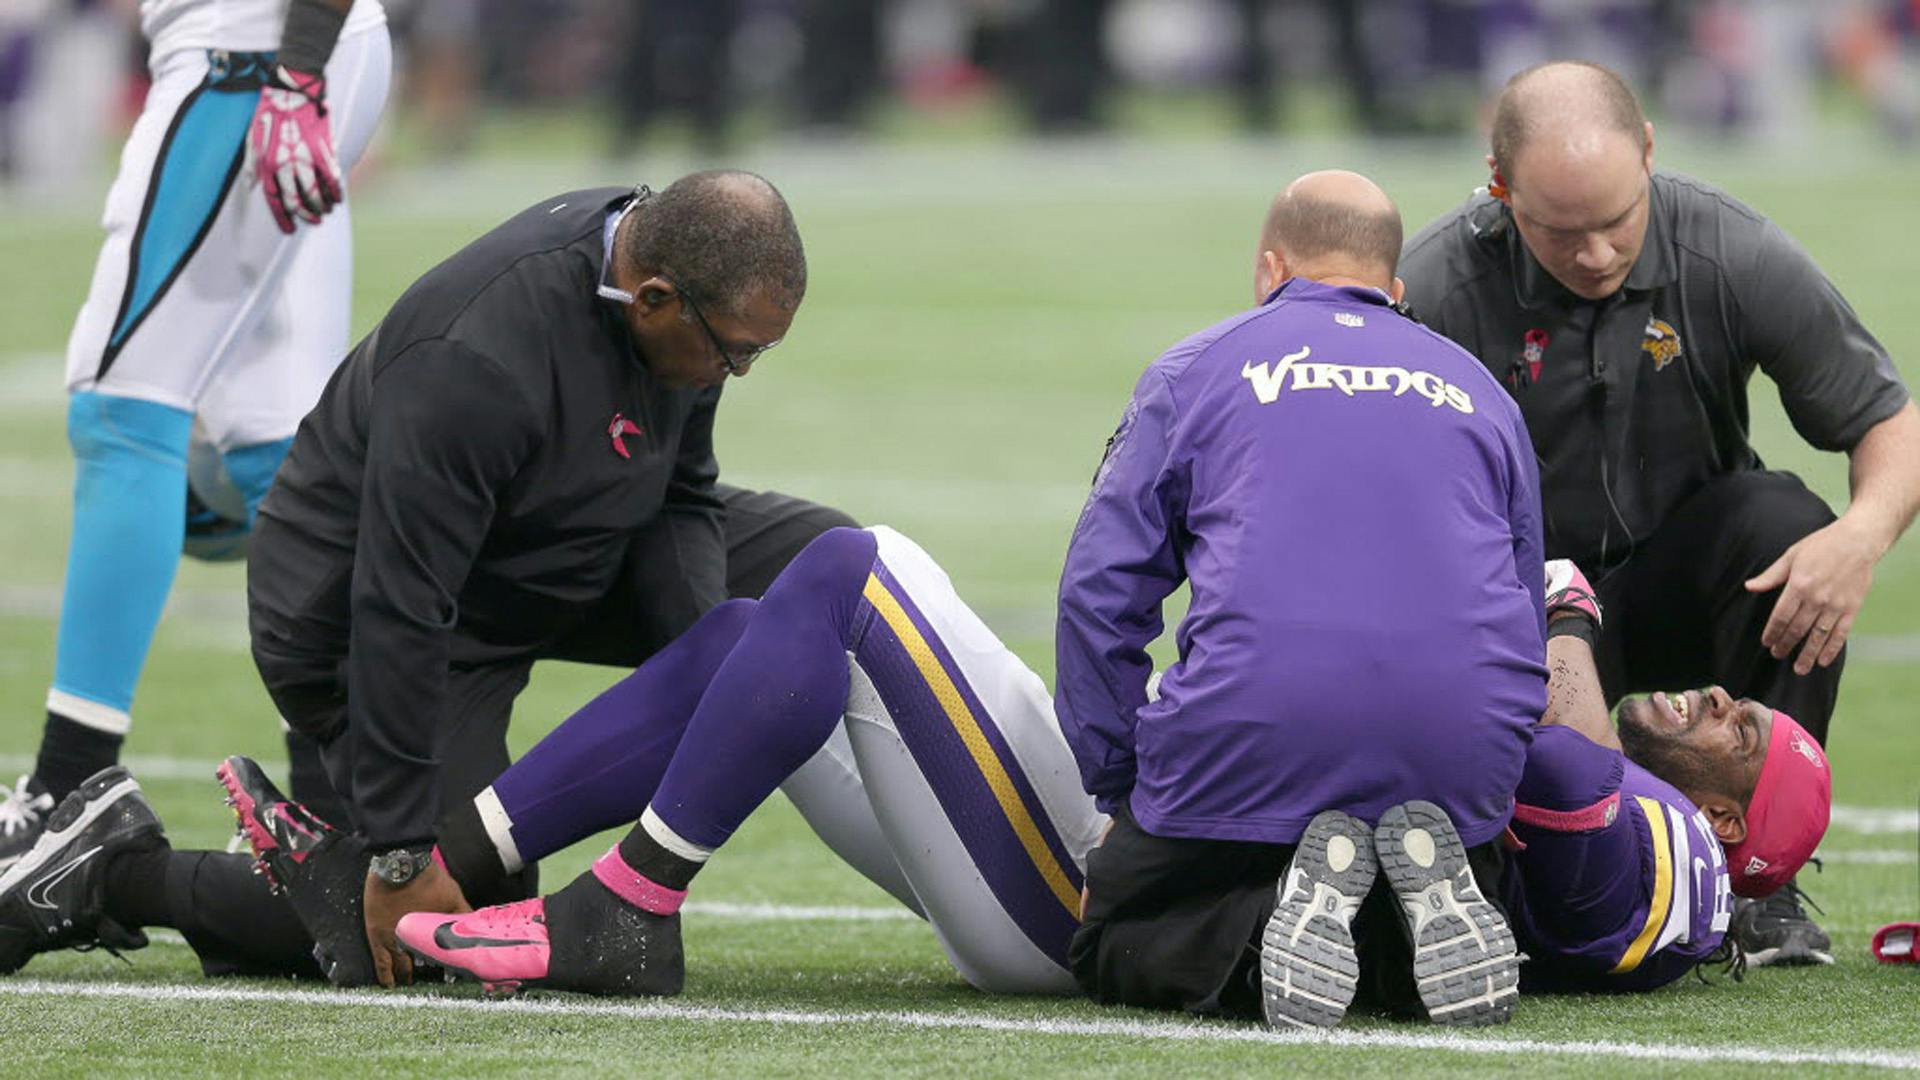 Vikings linebacker Desmond Bishop tore the ACL in his right knee in Sunday's loss to Carolina.